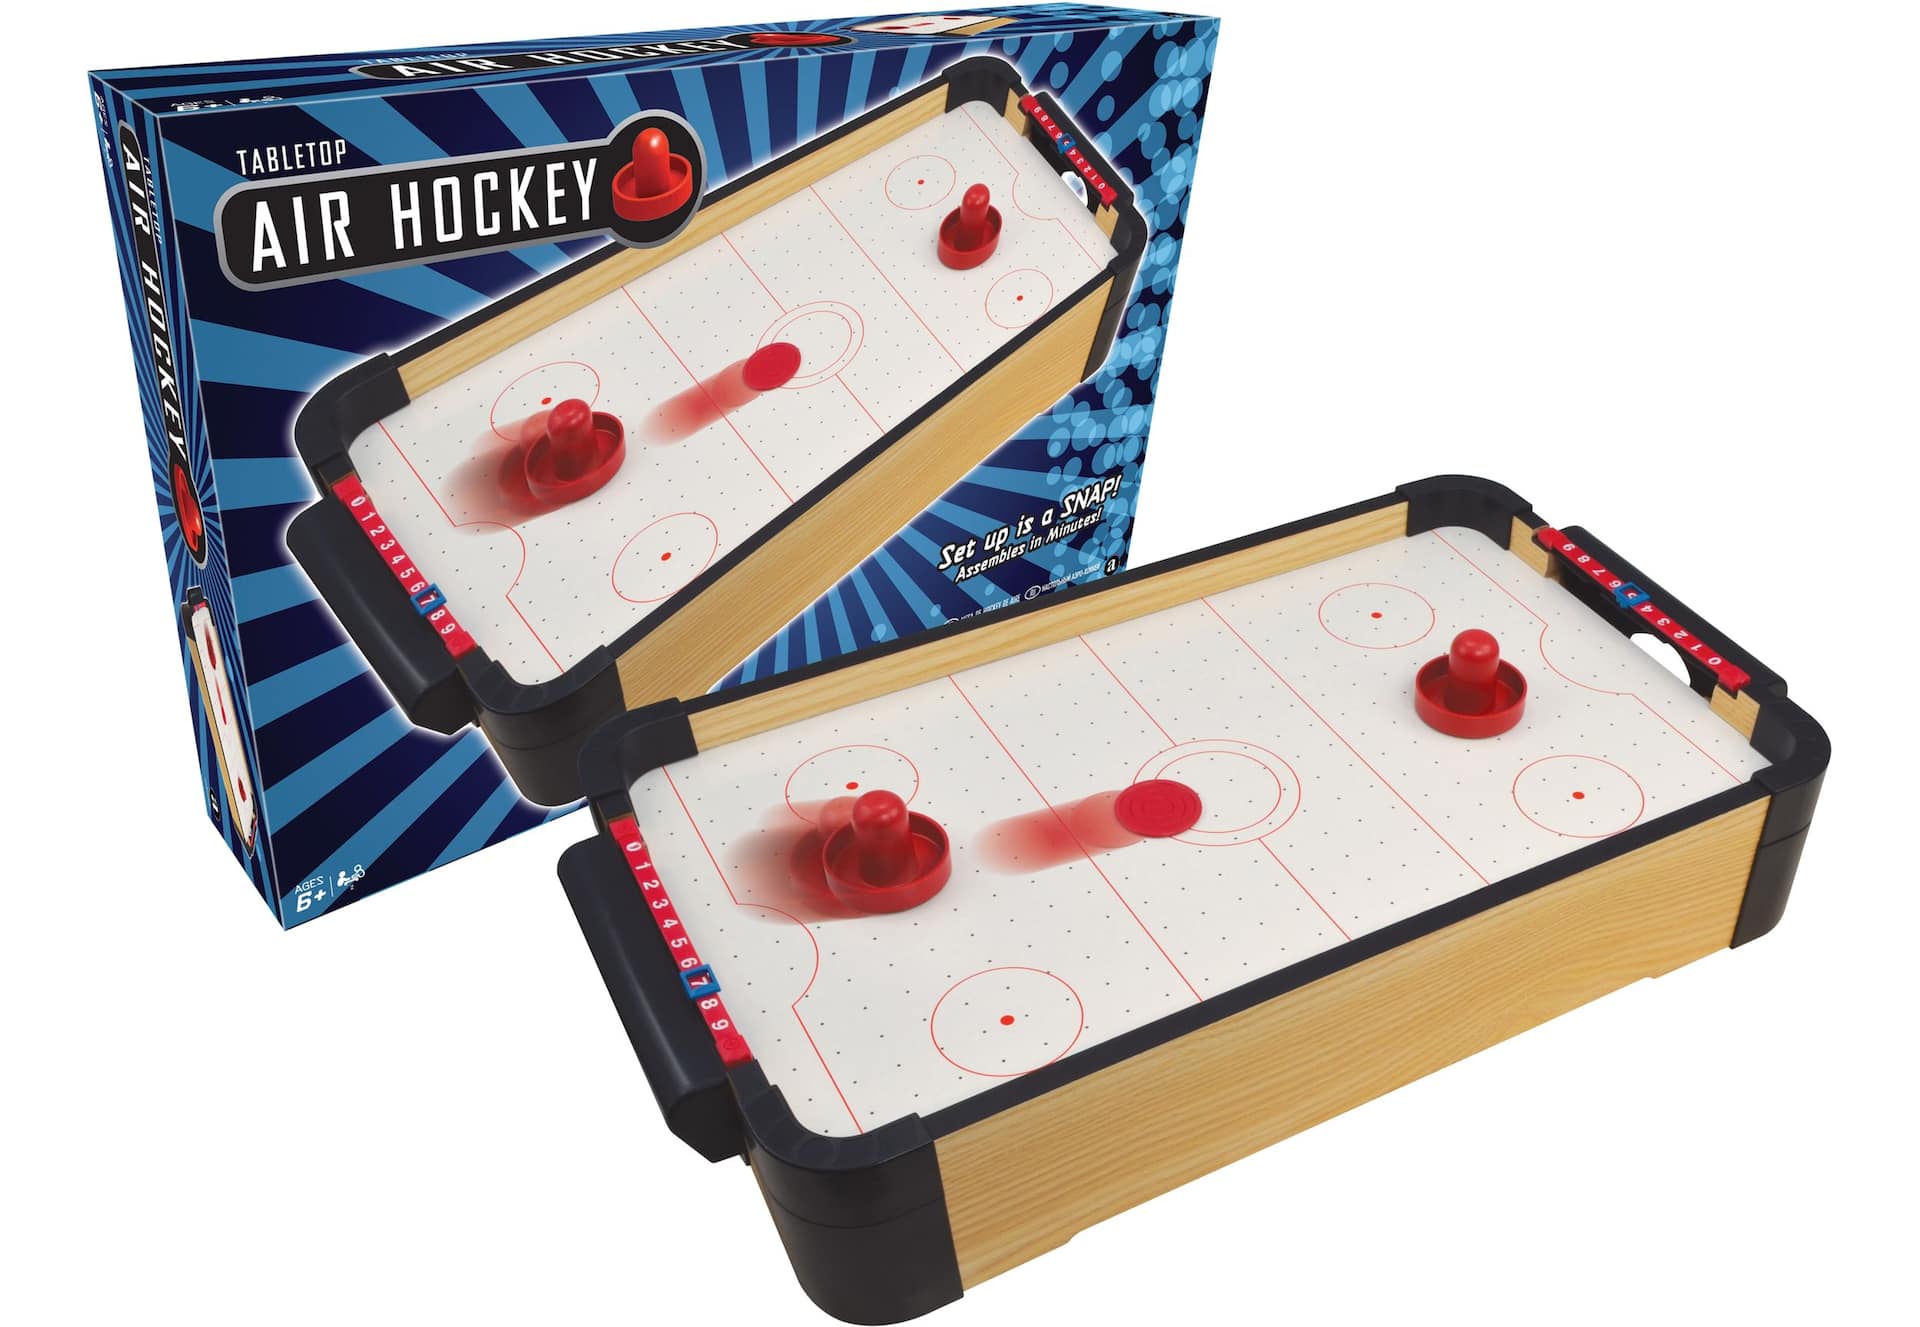 Snap 'N' Play 2-Player Table Top Hover Air Hockey Game, Wood